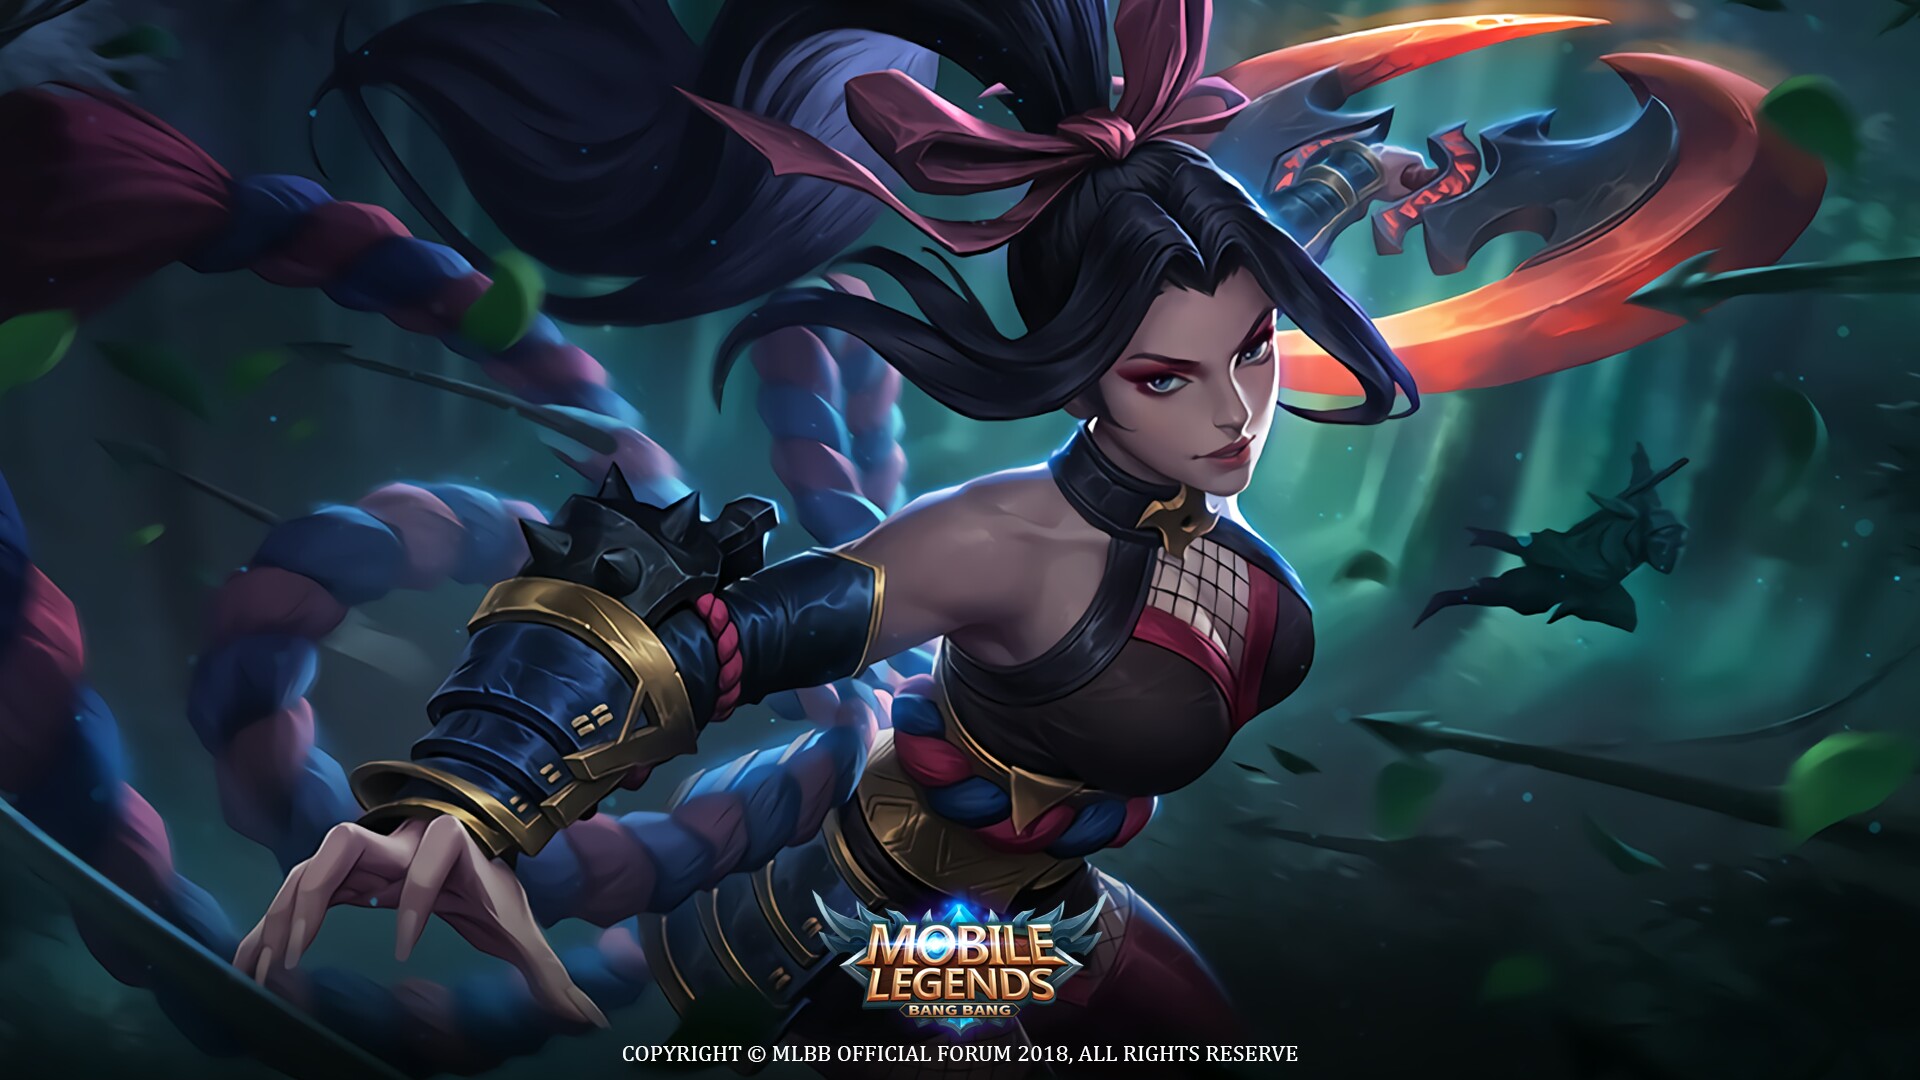  Best Mobile Legends Wallpapers Ever Free Download for Mobile